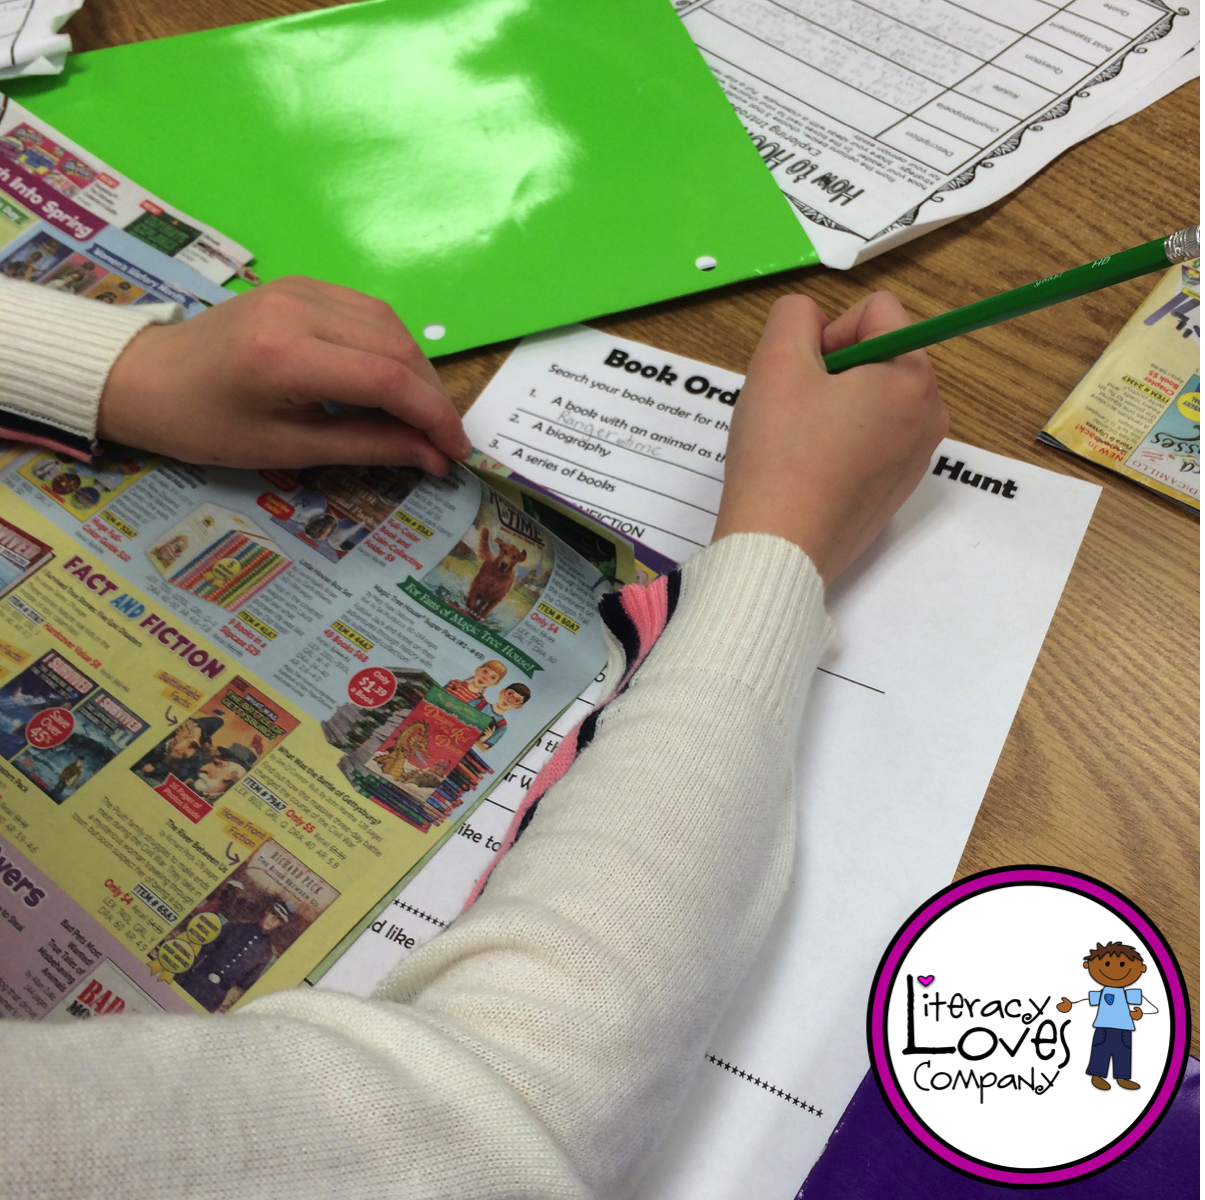 Looking for book order activities for your classroom?  Book Order Scavenger Hunts are a great idea to increase engagement!